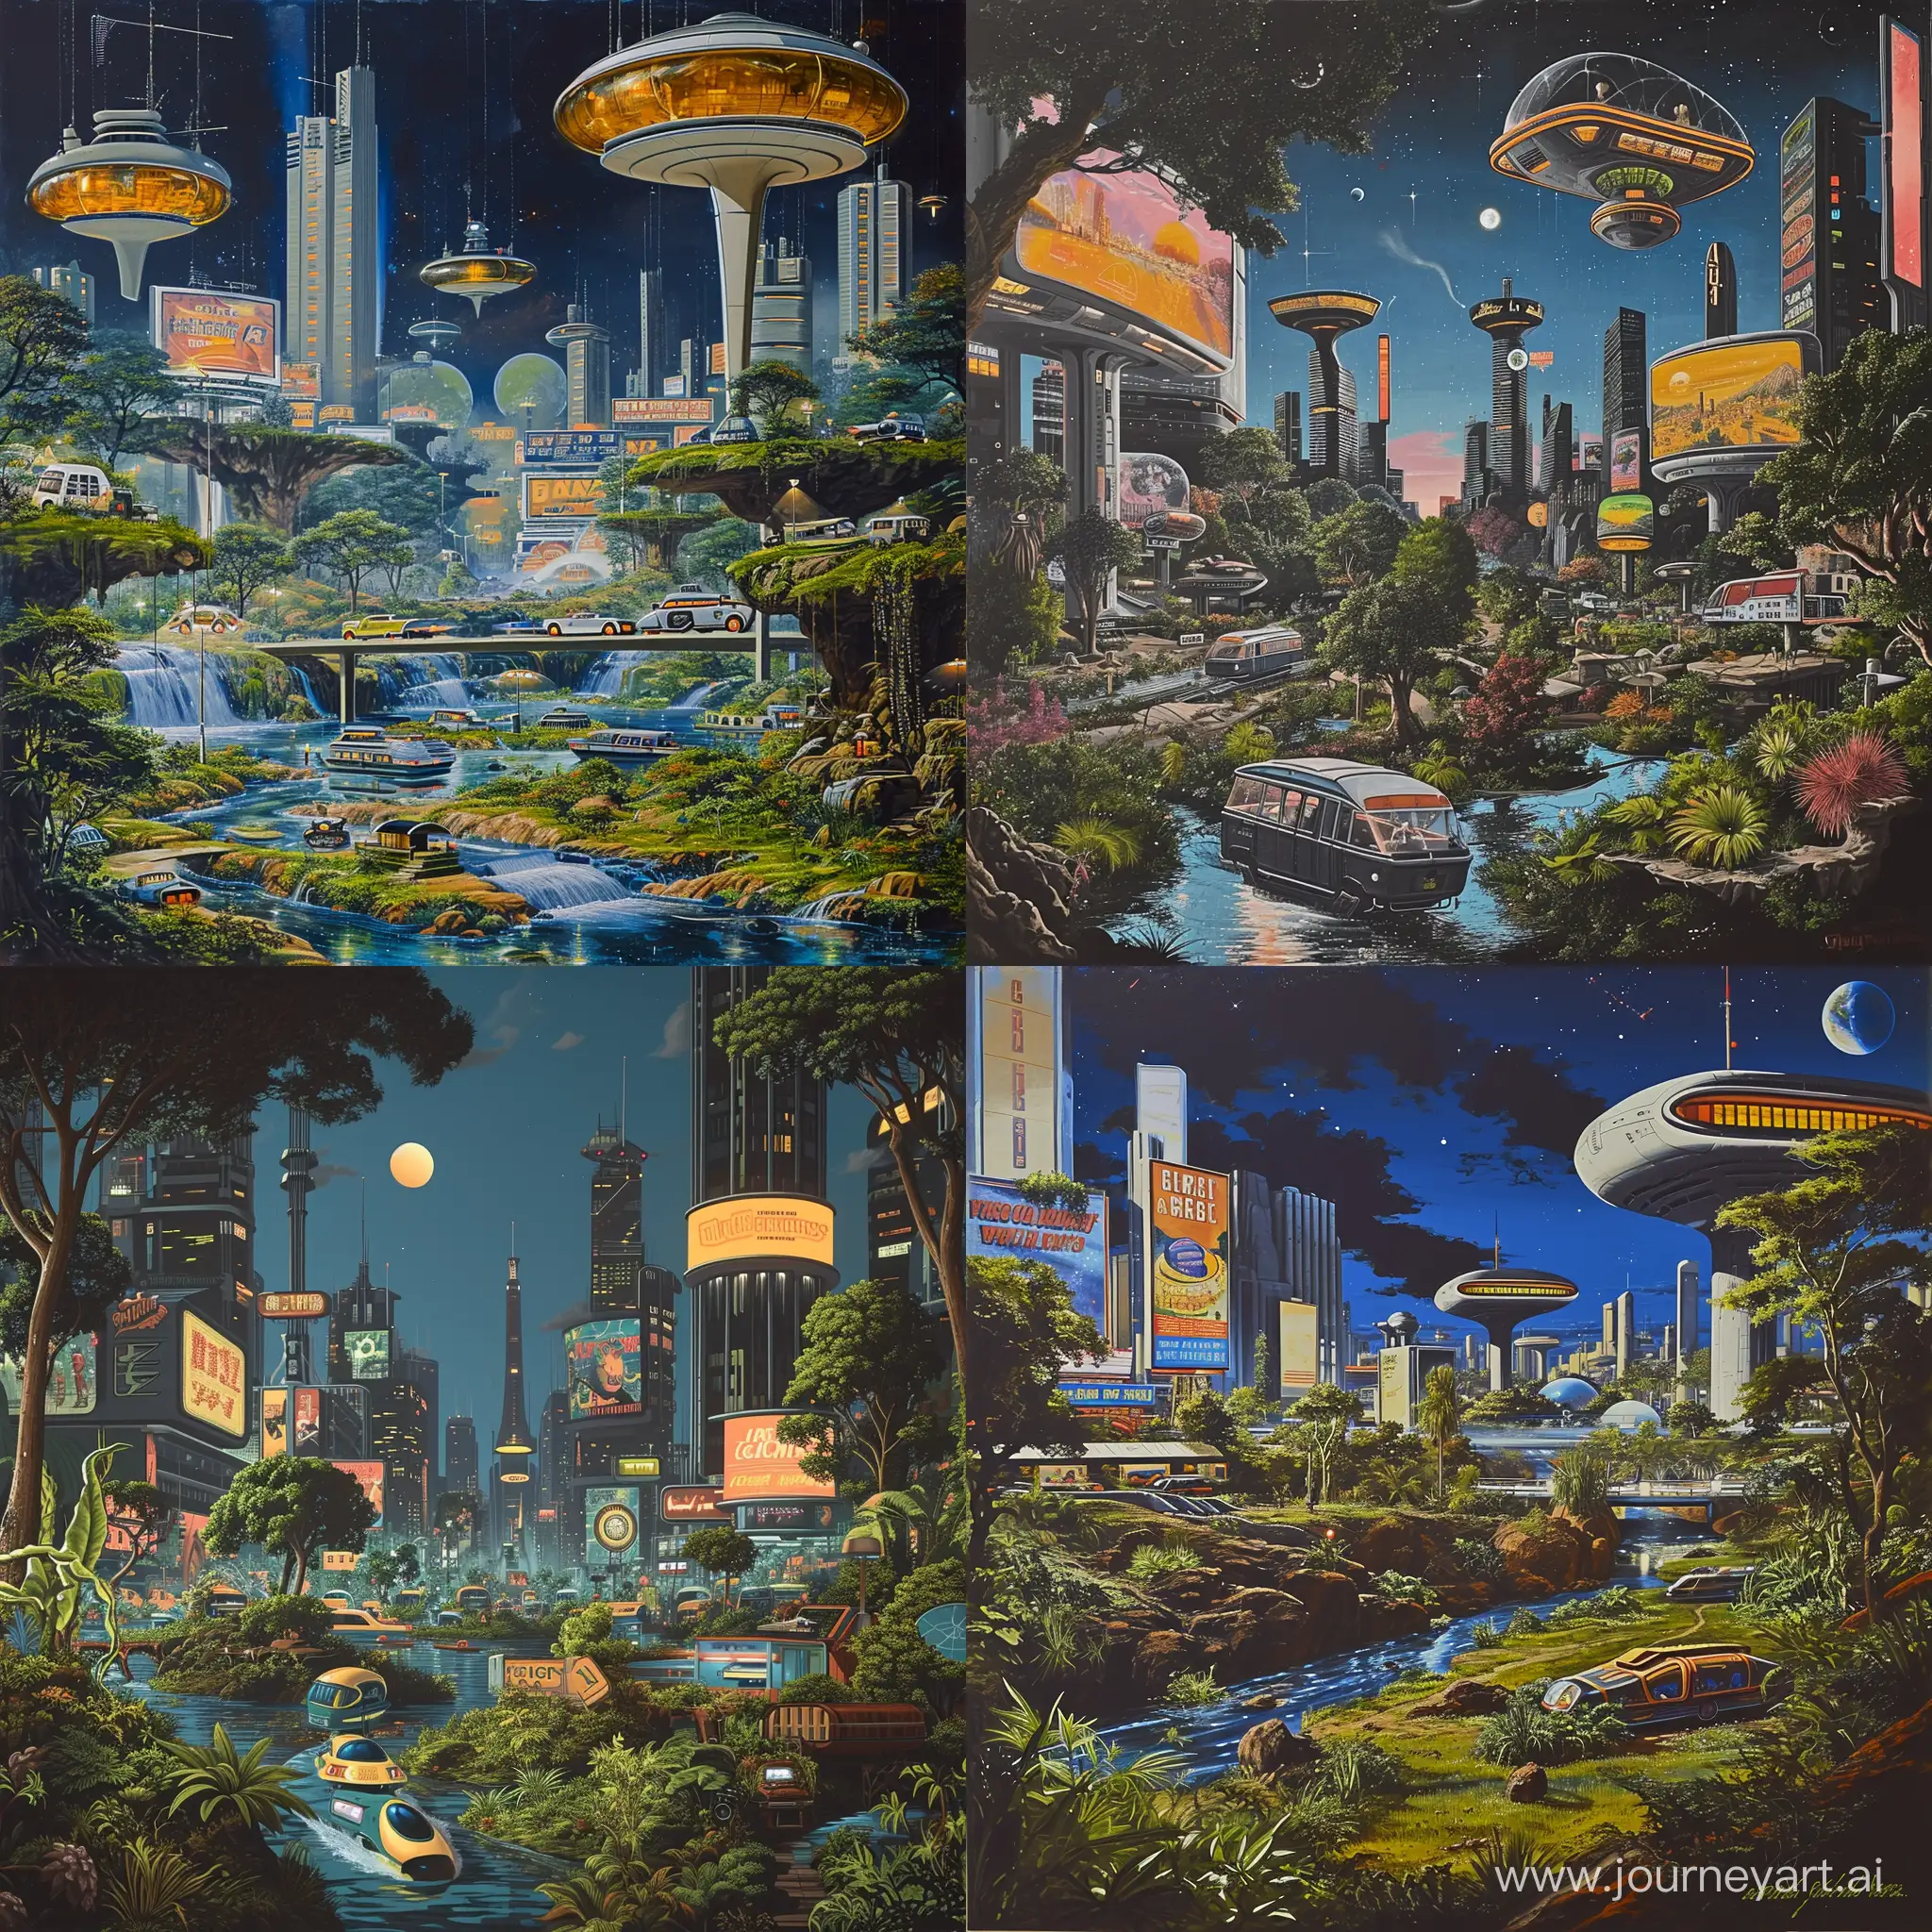 "Create a detailed airbrush painting that captures the essence of a bustling yet tranquil retro-futuristic city environment. It's night time in a scene filled with retro sci-fi charm and 70s-inspired aesthetics. The city is alive with vibrant colors and nature, blending the old with the new. The urban landscape boasts modern architecture alongside advanced technology. Modes of transportation unique to this science fiction setting move throughout the city, while vintage billboards add character to the skyline. The artwork should convey a sense of nostalgia while also depicting a forward-thinking, open city space."

